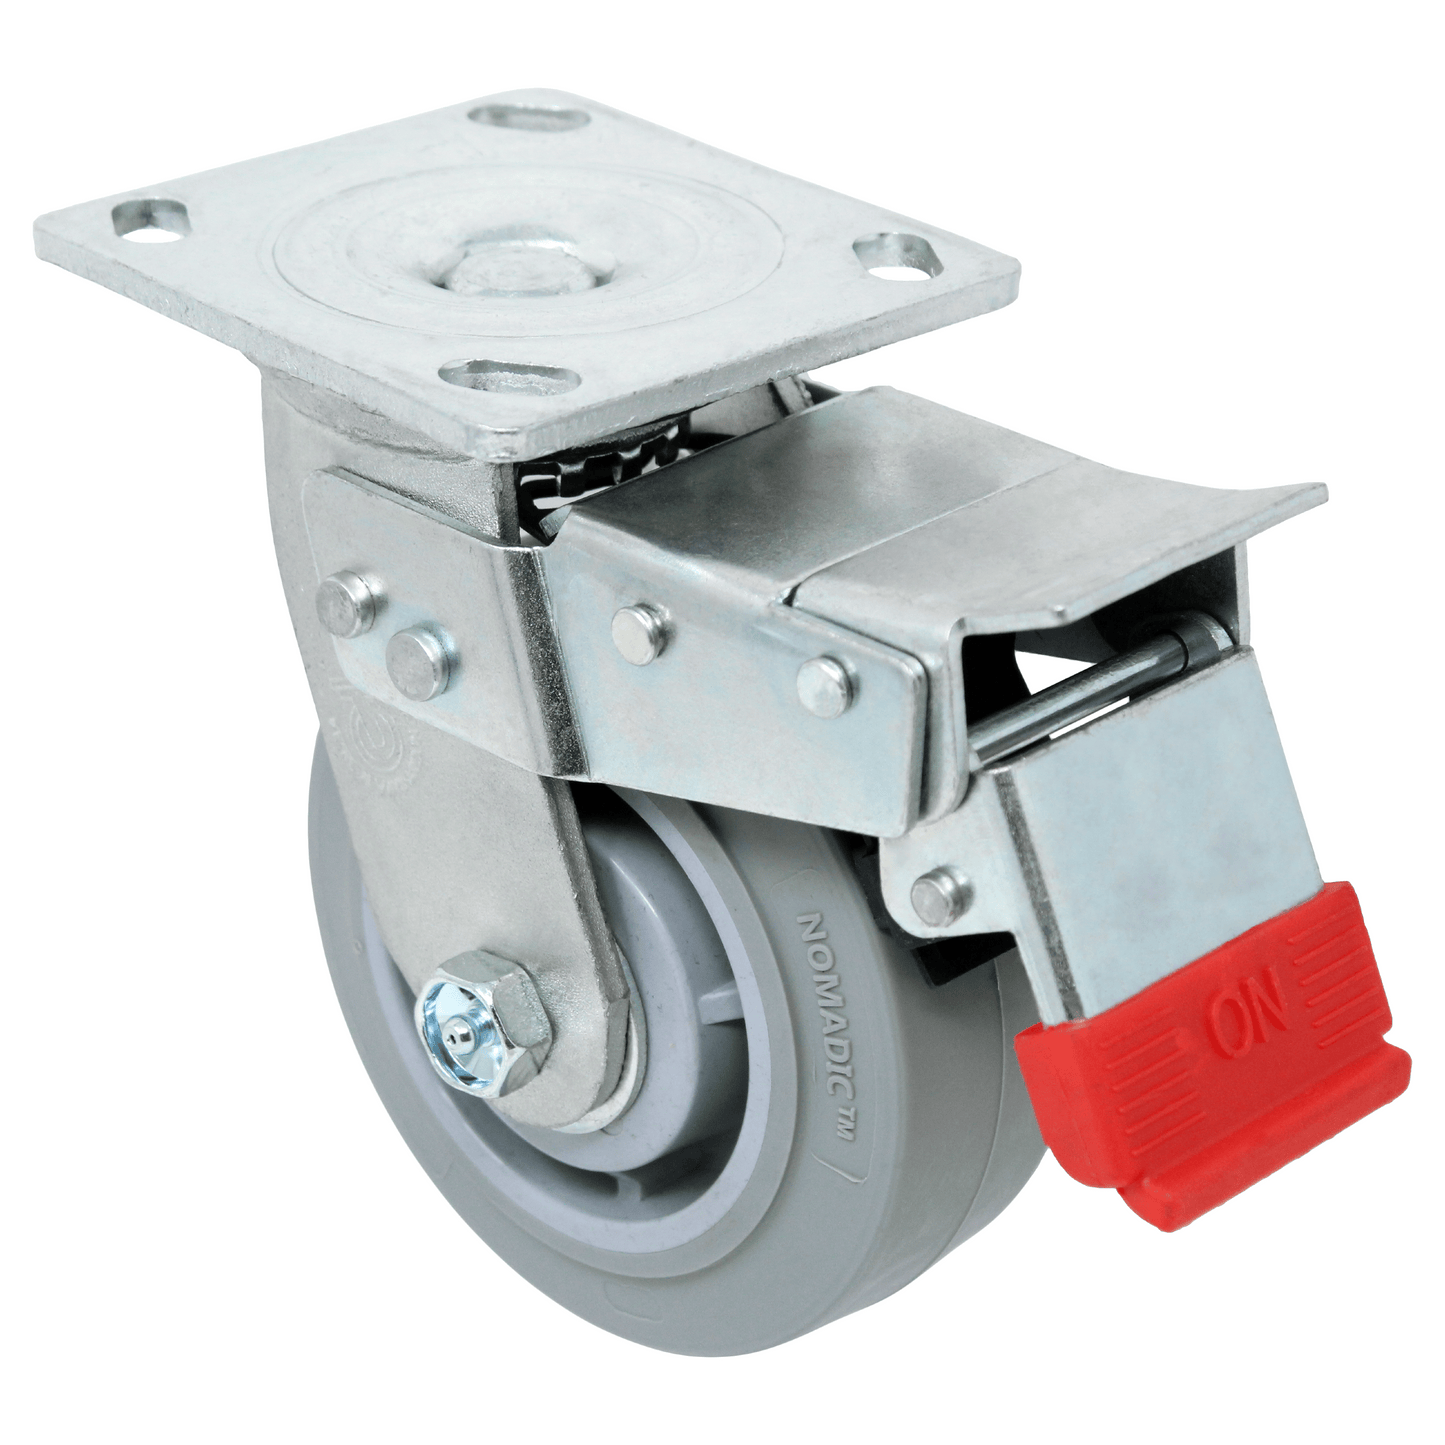 5" x 2" Nomadic Wheel Swivel Caster W/ Total Lock Brake - 500 lbs. capacity - Durable Superior Casters